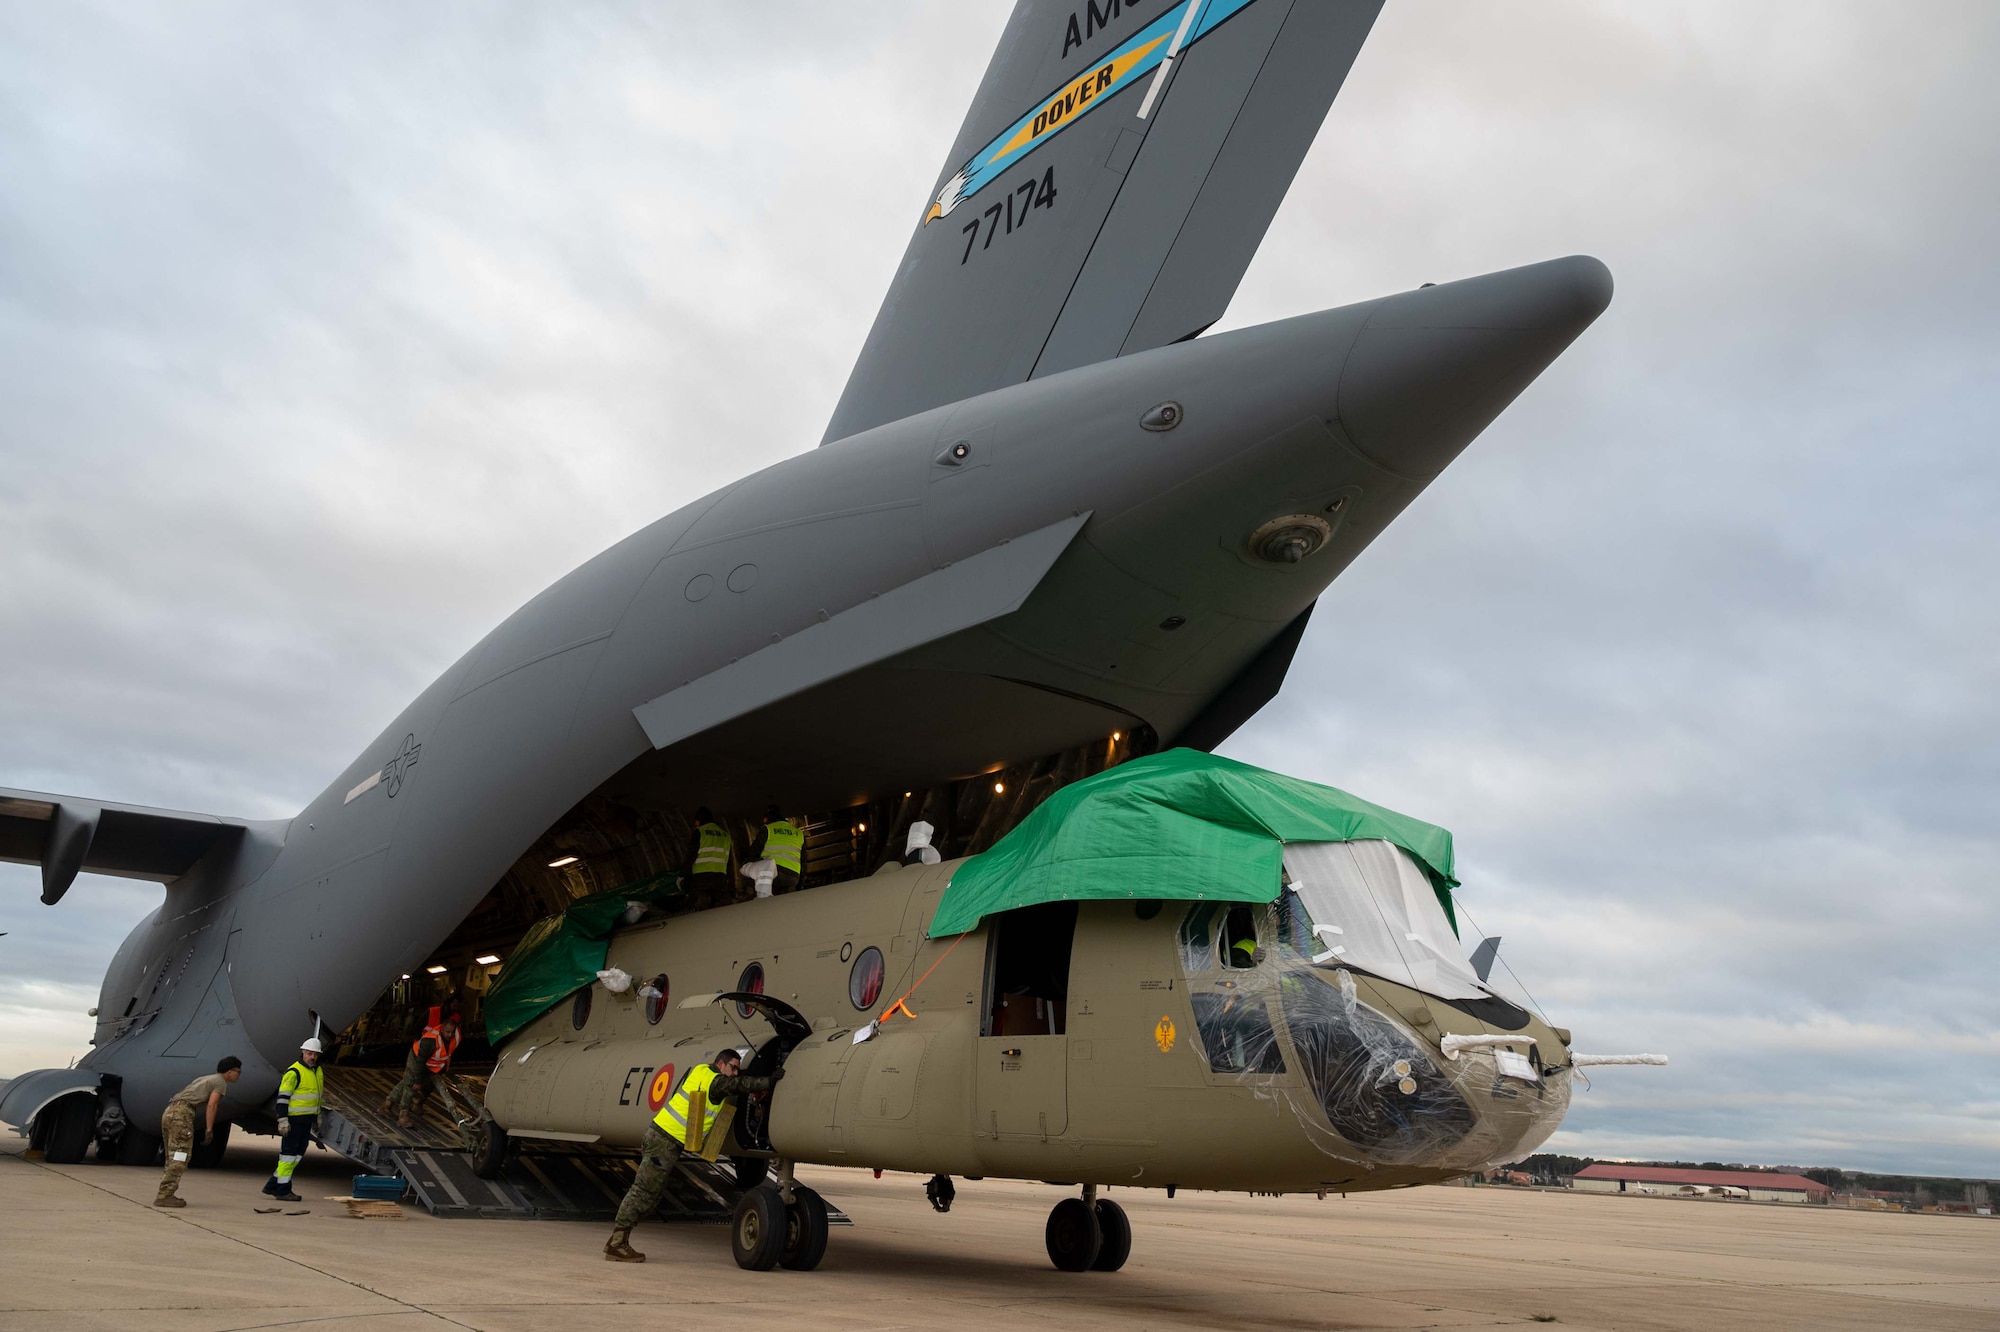 A CH-47F Chinook helicopter is unloaded from a C-17 Globemaster III assigned to Dover Air Force Base, Delaware, during a foreign military sales mission at Torrejón Air Base, Spain, Jan. 16, 2023. The United States and Spain recognize the central importance of the NATO alliance in ensuring transatlantic peace and security. As NATO Allies for 40 years, the U.S. and Spain are steadfastly committed to providing NATO with ready forces and capabilities, strengthening transatlantic ties. (U.S. Air Force photo by Senior Airman Faith Barron)